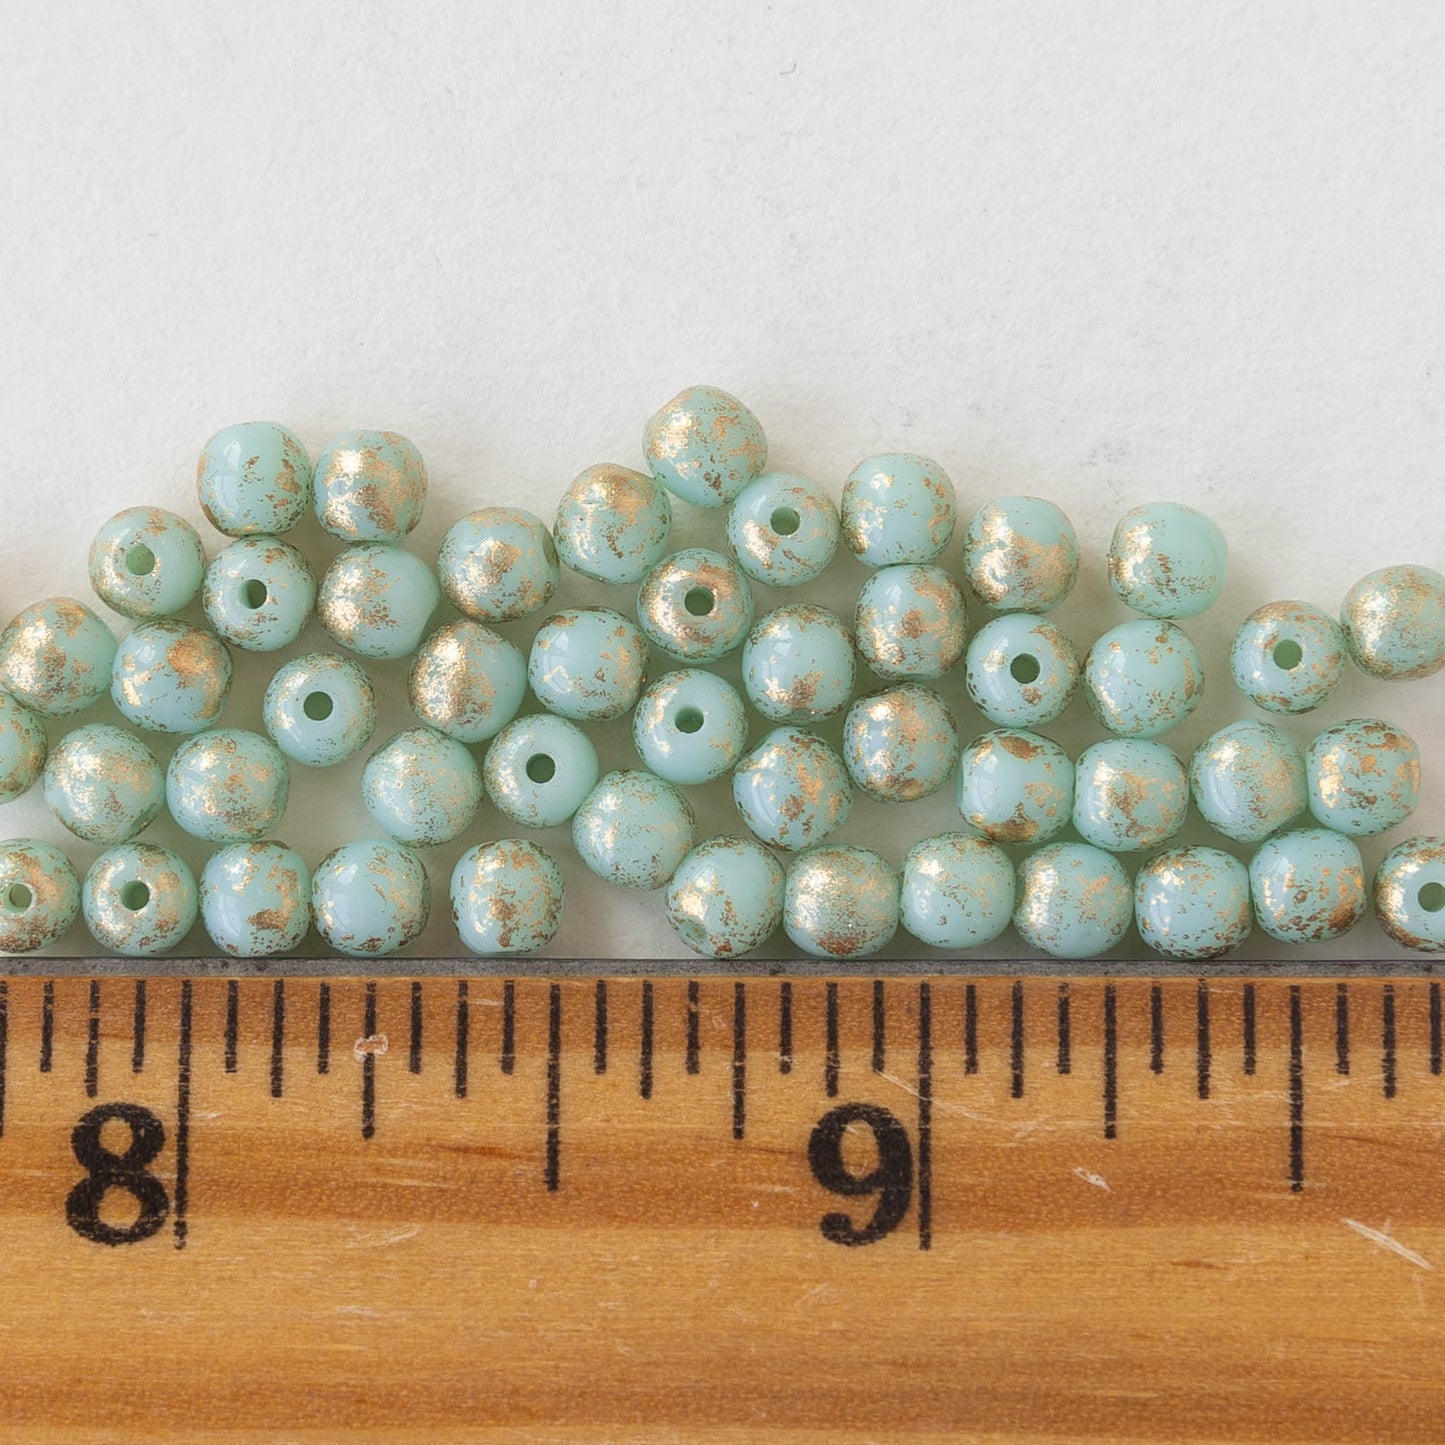 4mm Round Glass Beads - Mint Green with Gold - 50 Beads